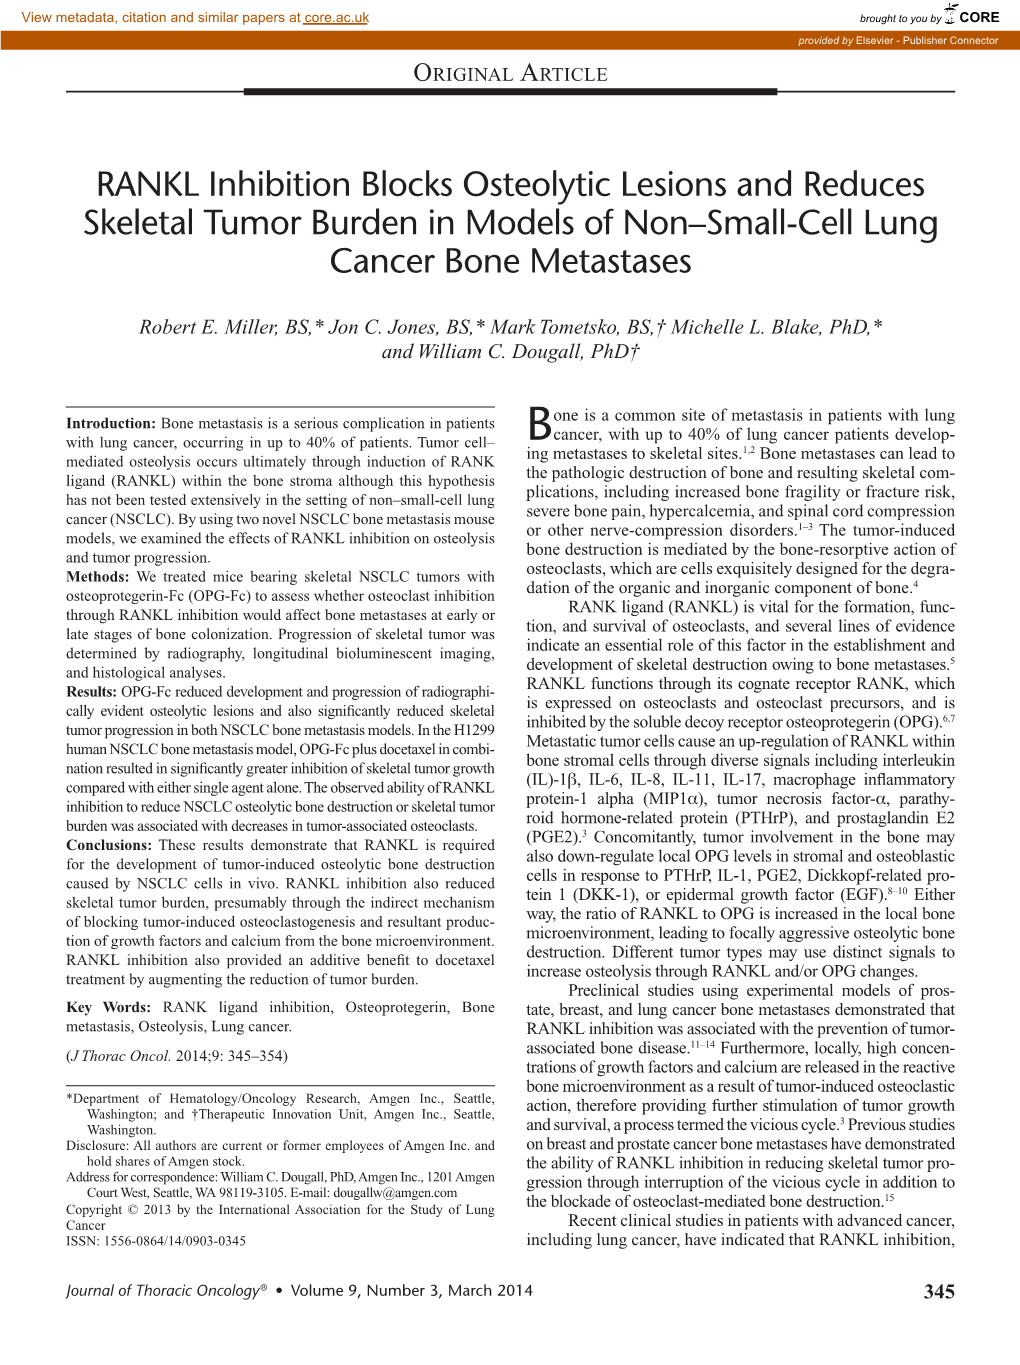 RANKL Inhibition Blocks Osteolytic Lesions and Reduces Skeletal Tumor Burden in Models of Non–Small-Cell Lung Cancer Bone Metastases